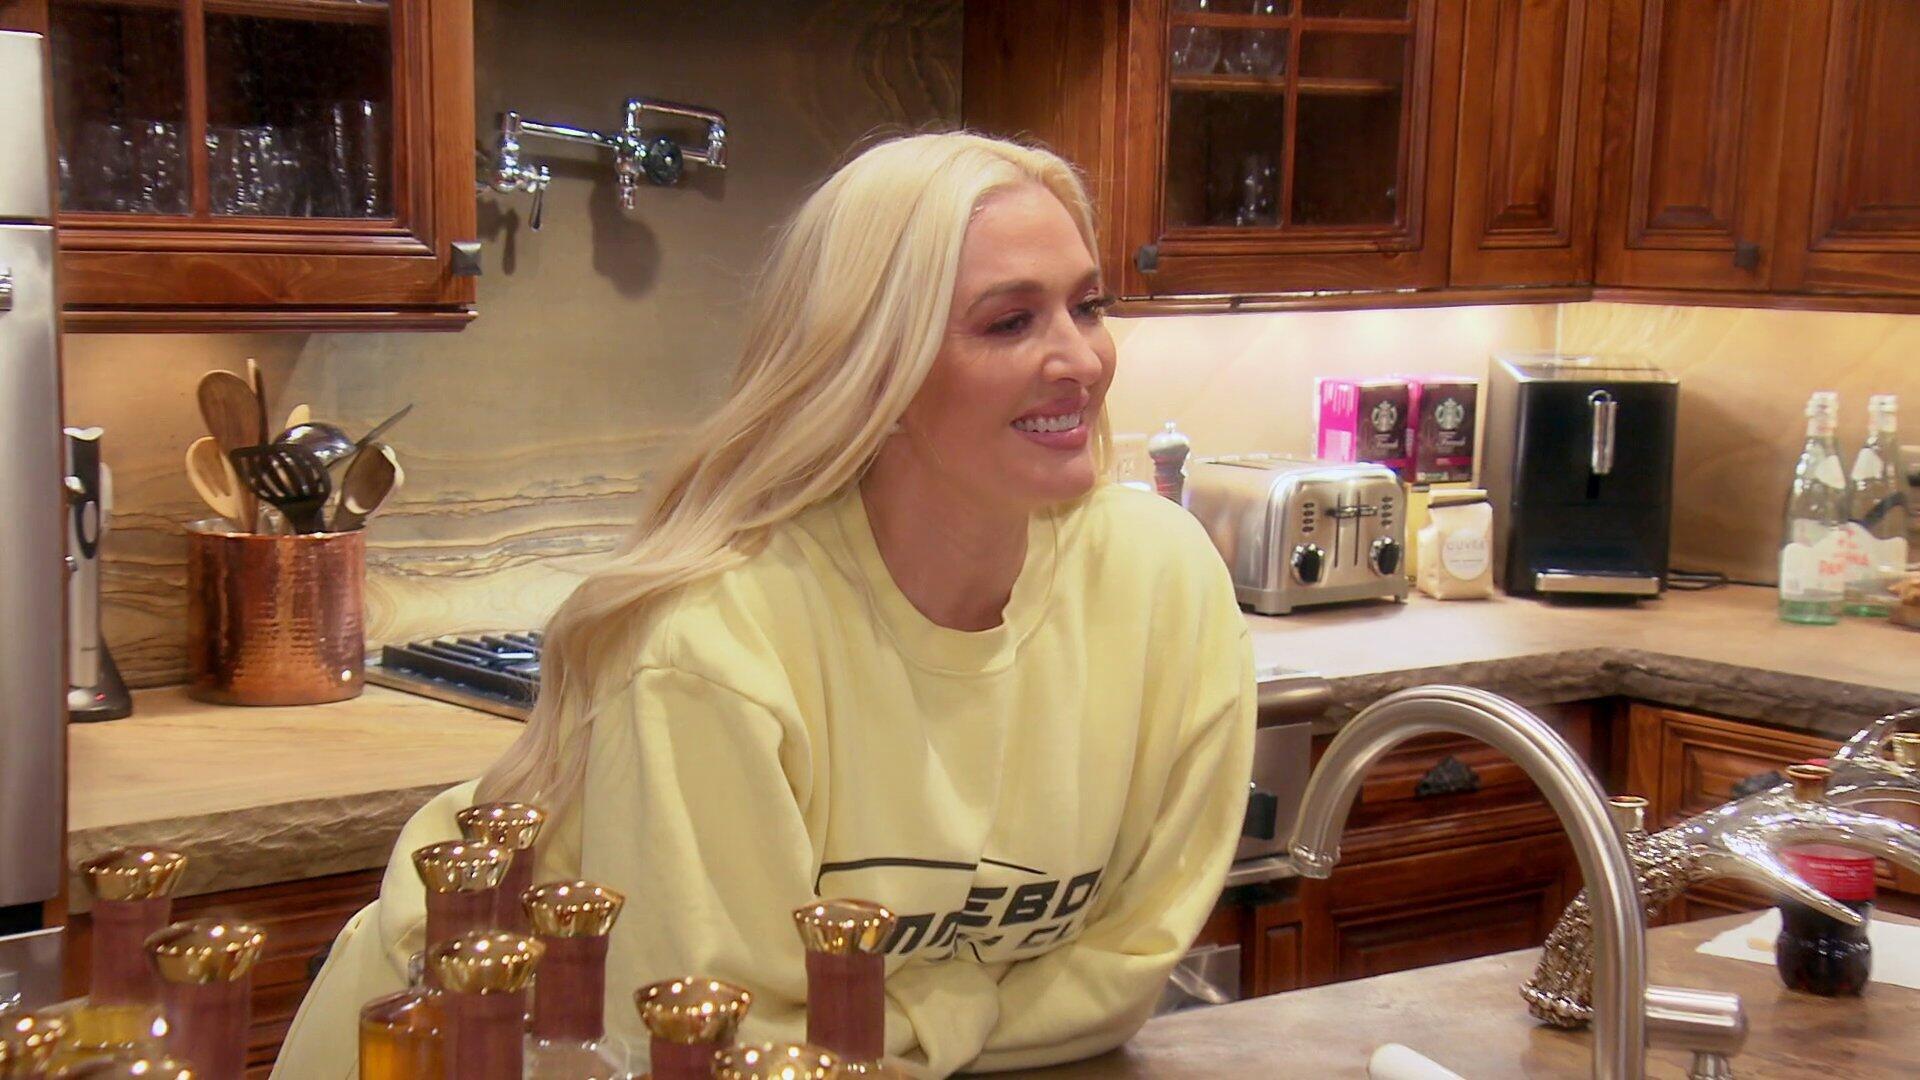 Erika Jayne - The Real Housewives of Beverly Hills | Season 12 Episode 16 | Crystal Kung Minkoff style